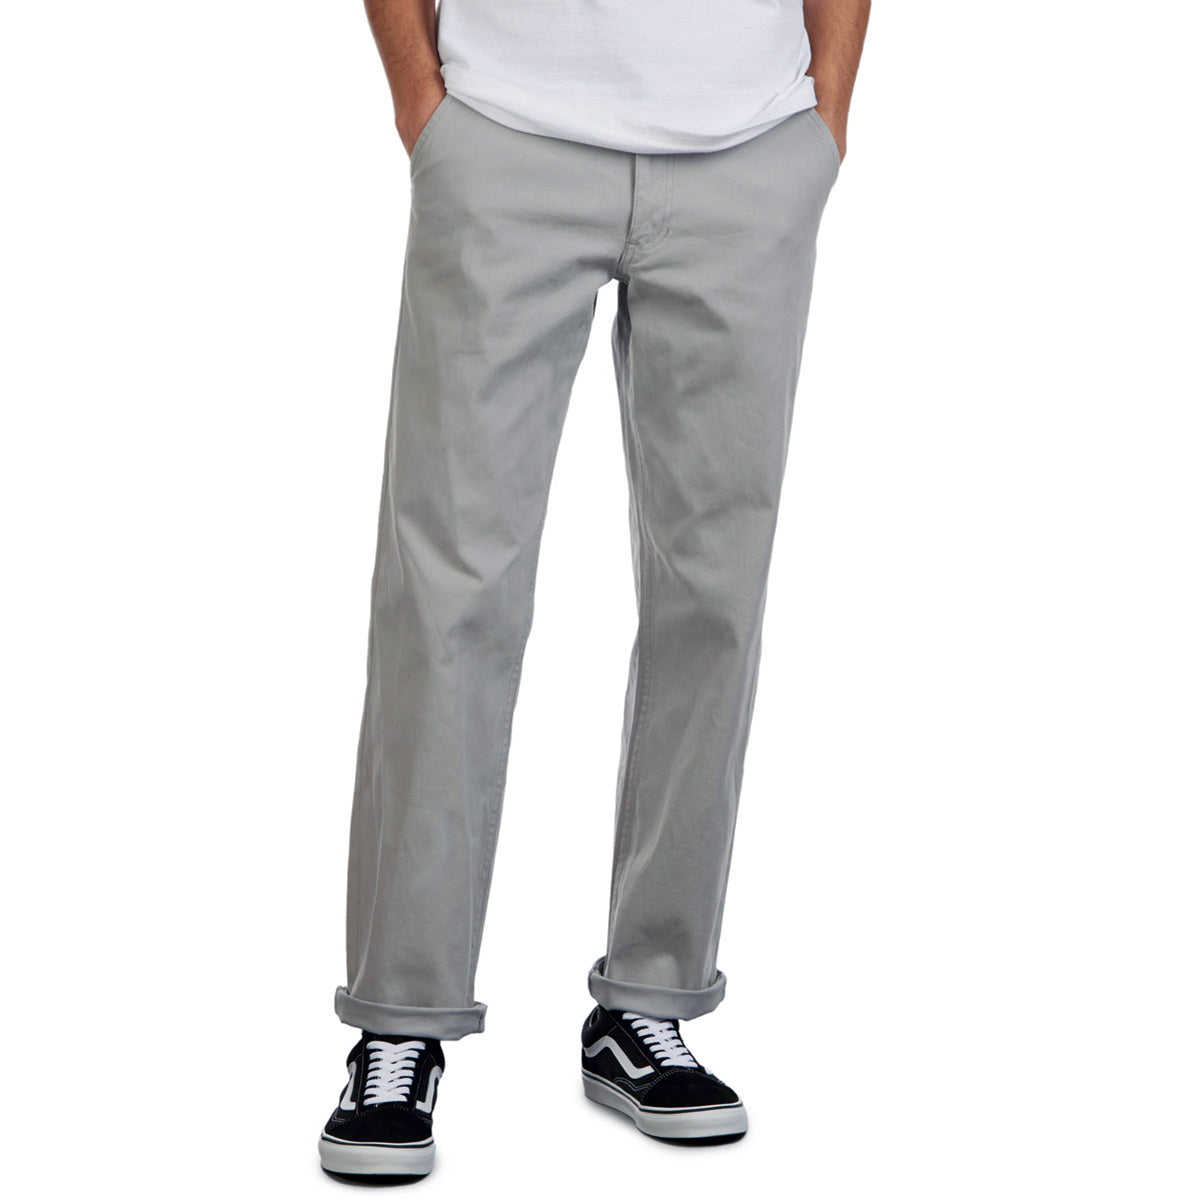 CCS Standard Plus Relaxed Chino Pants - Dove Grey image 4